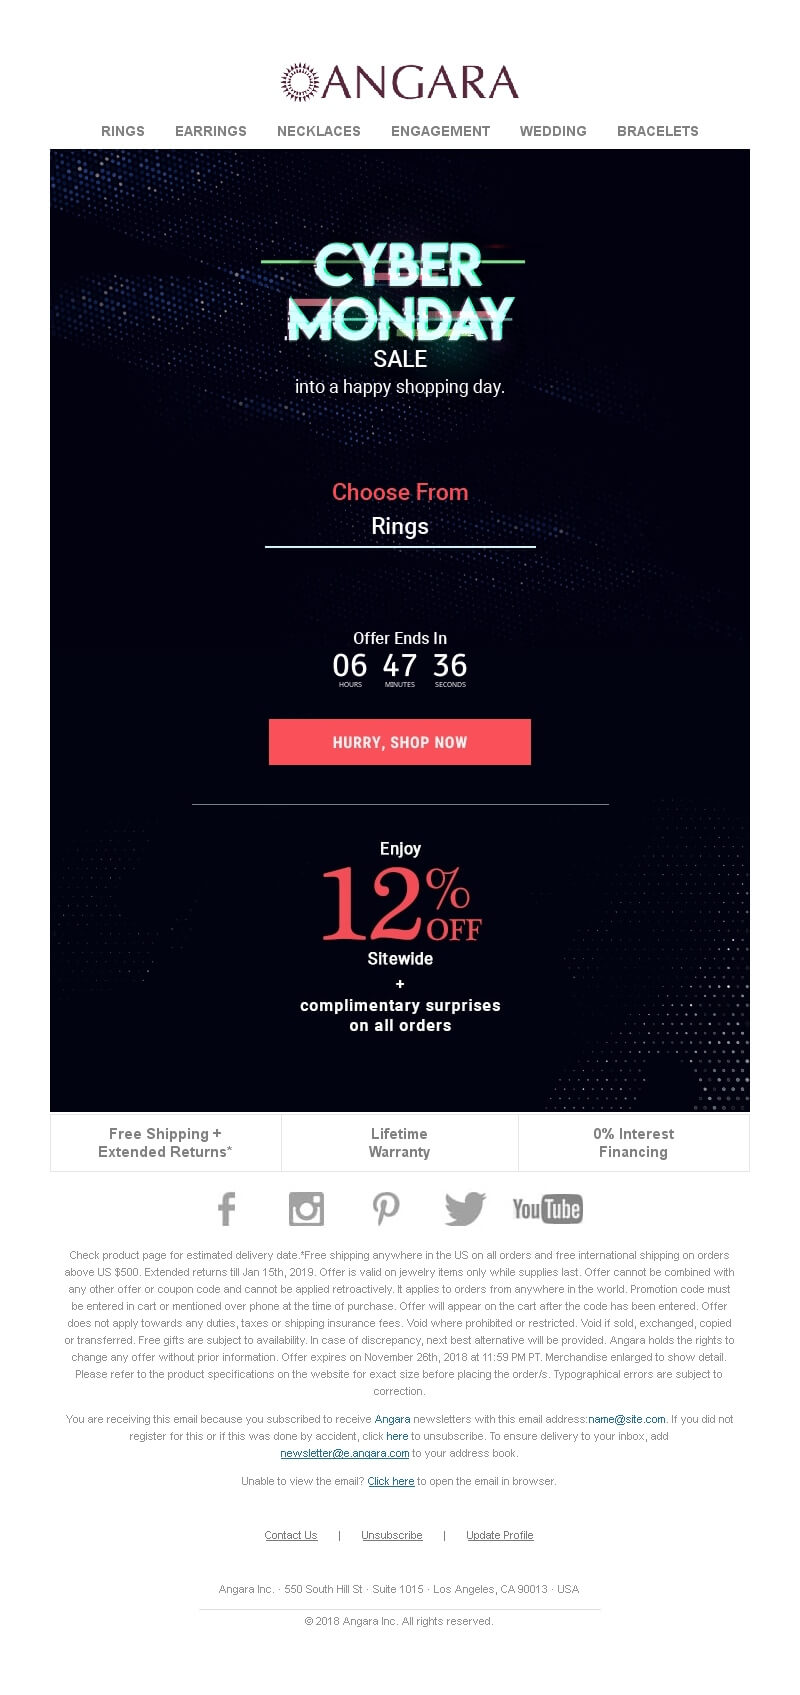 Cyber Monday Email Ideas: When You’re Not Sure What To Send 18